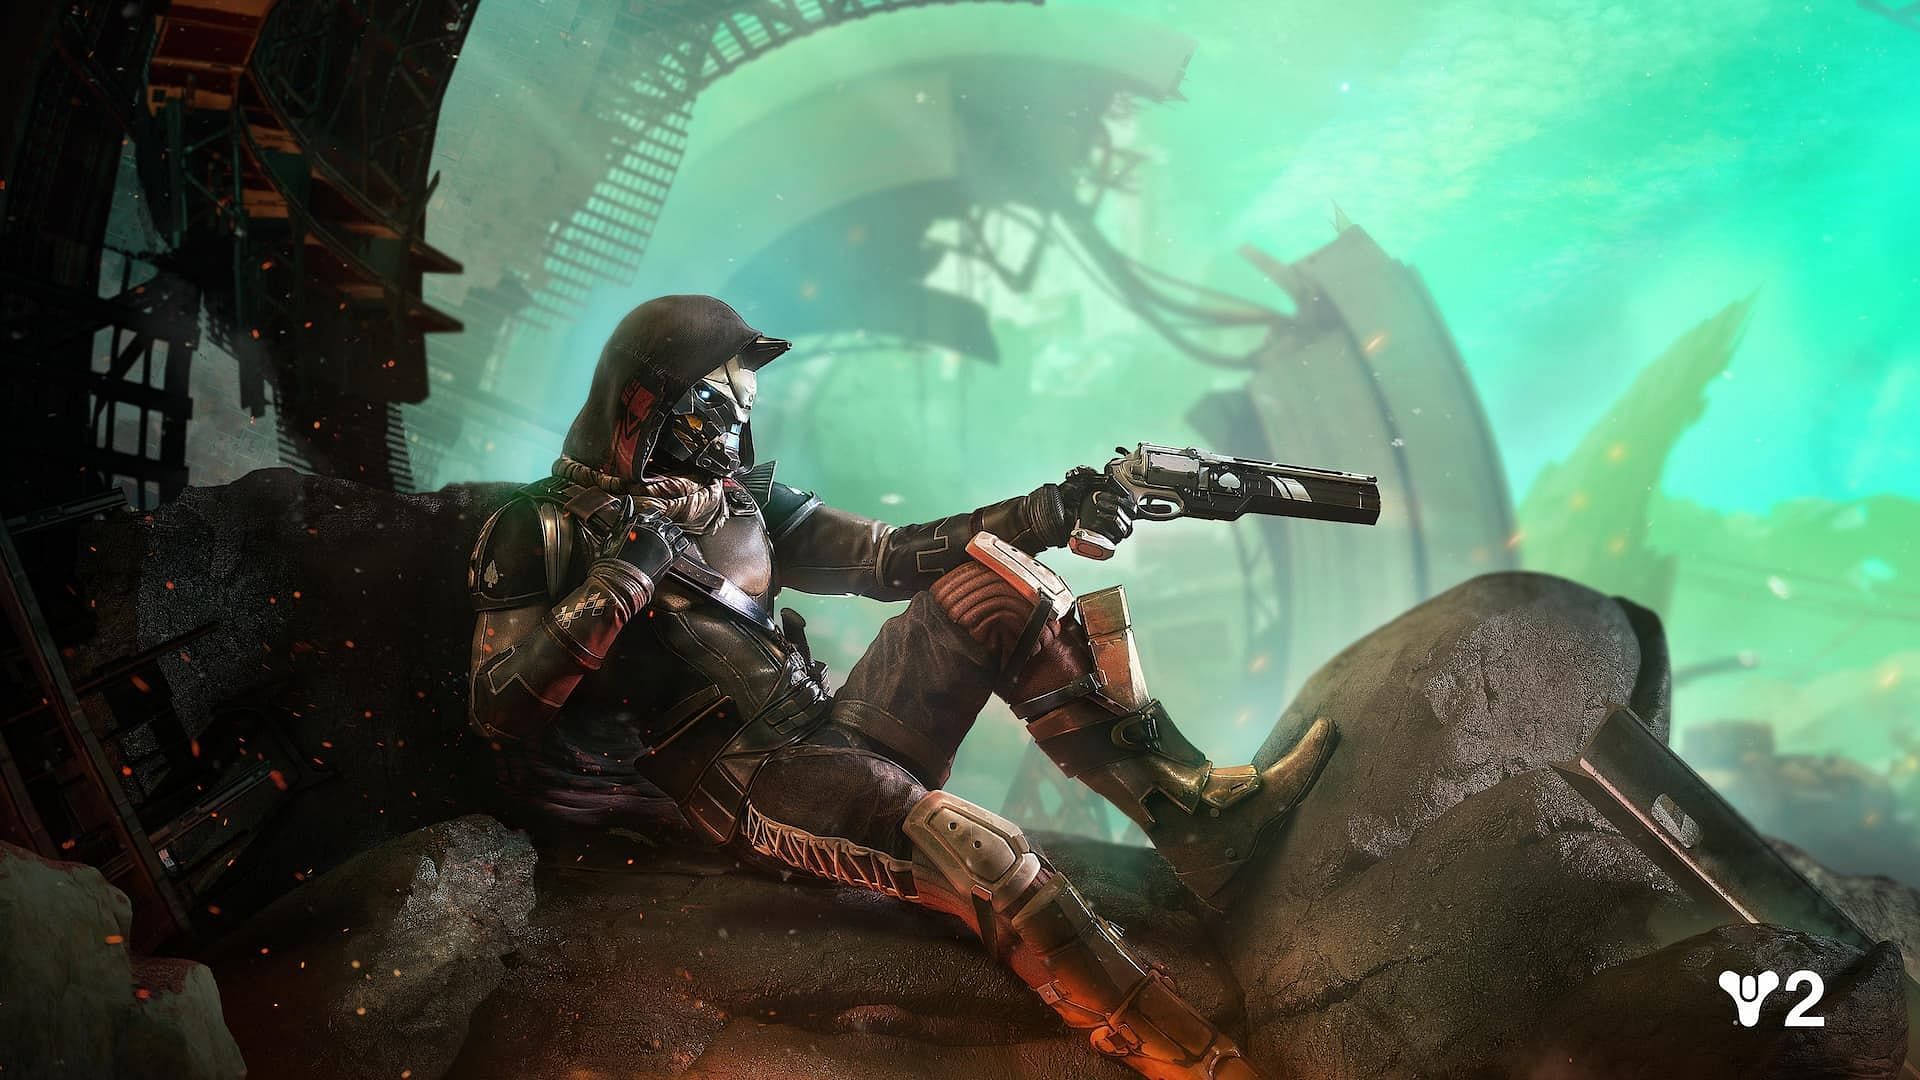 Cayde-6 is the fabled Hunter Vanguard in Destiny 2 (Image via Bungie)